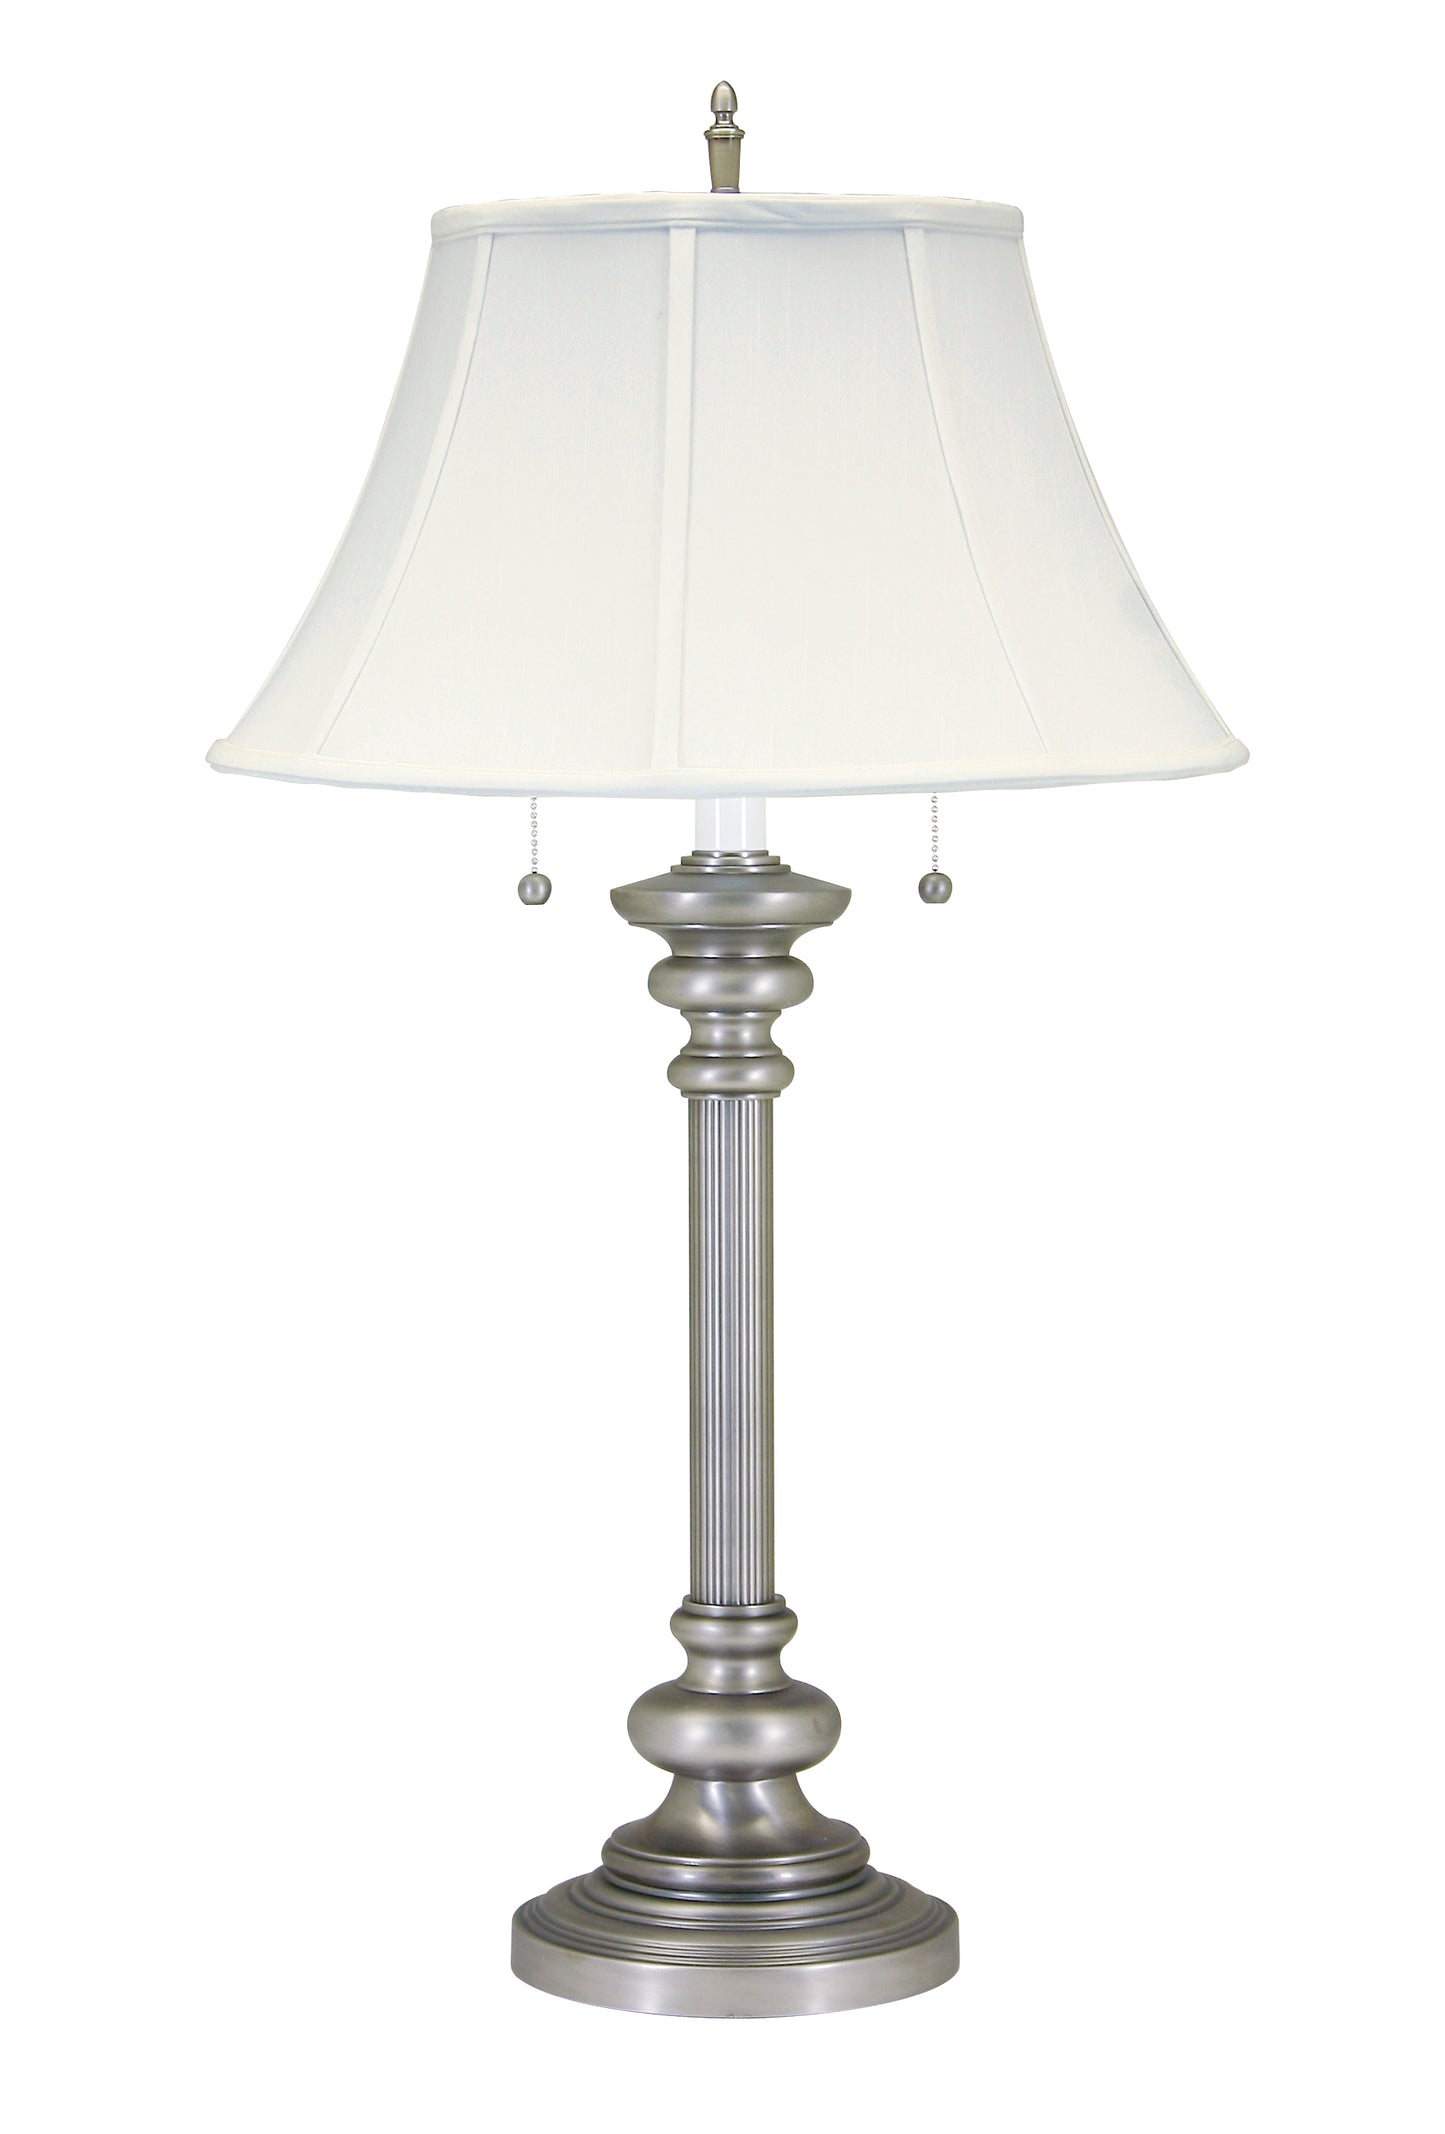 House of Troy Newport 30.25" Pewter Table Lamp N651-PTR